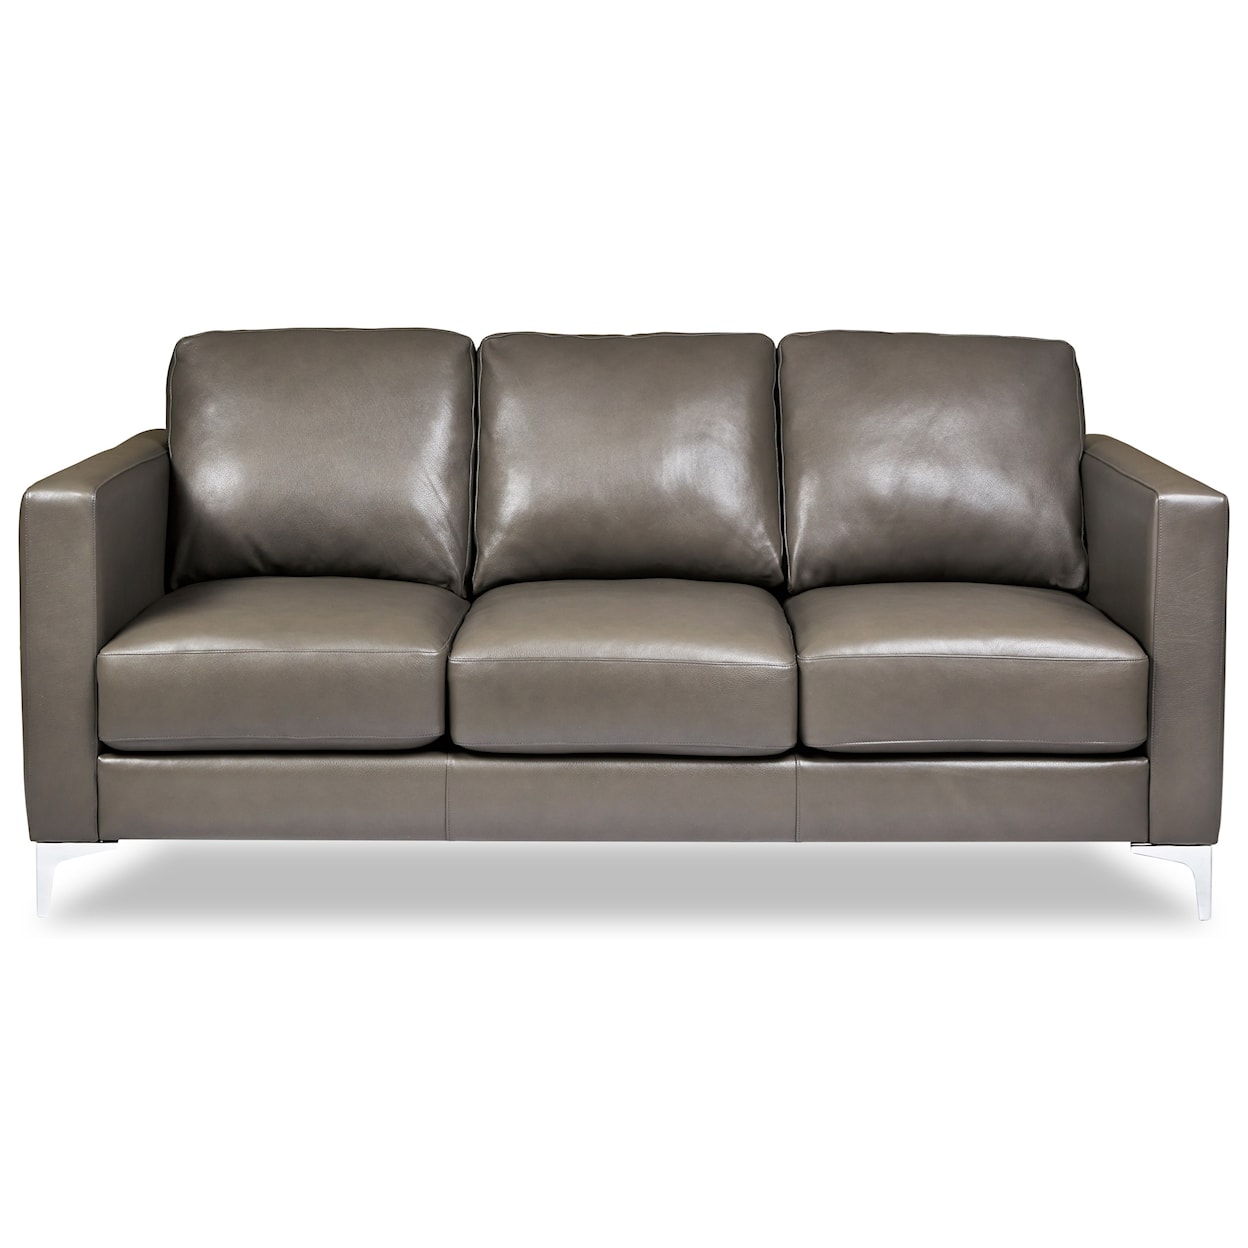 American Leather Kendall 3-Seat Sofa